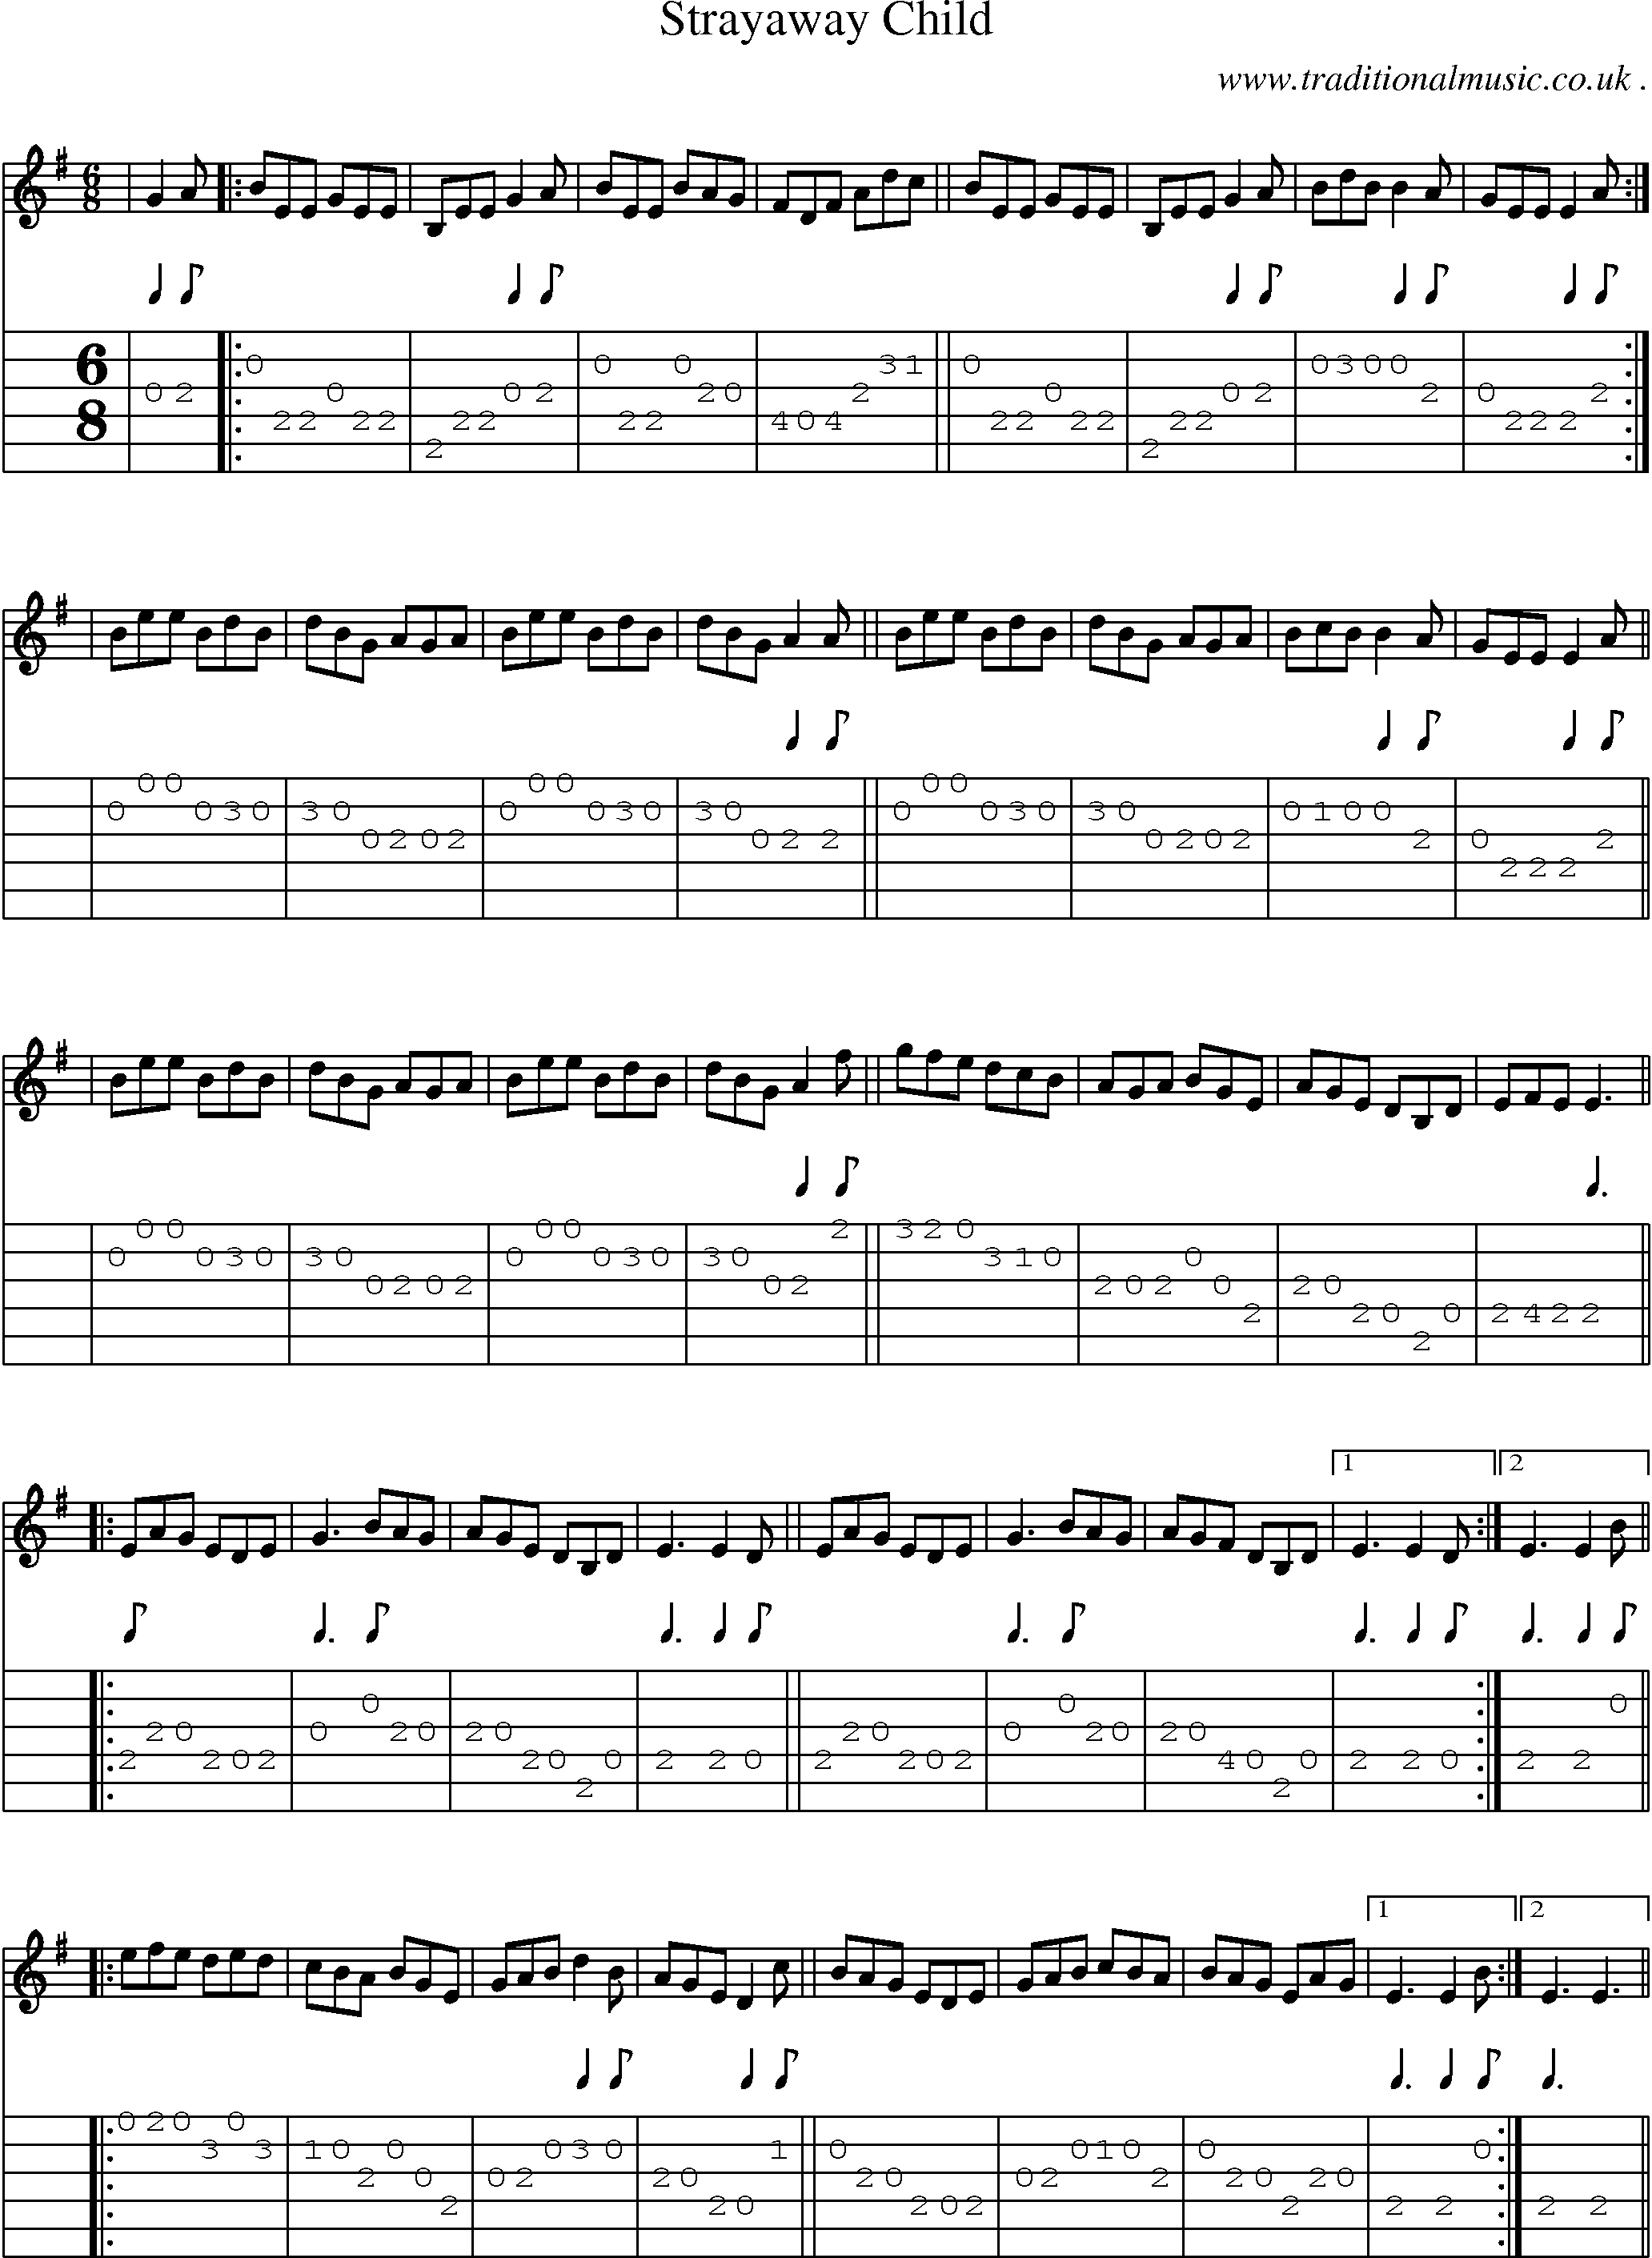 Sheet-music  score, Chords and Guitar Tabs for Strayaway Child